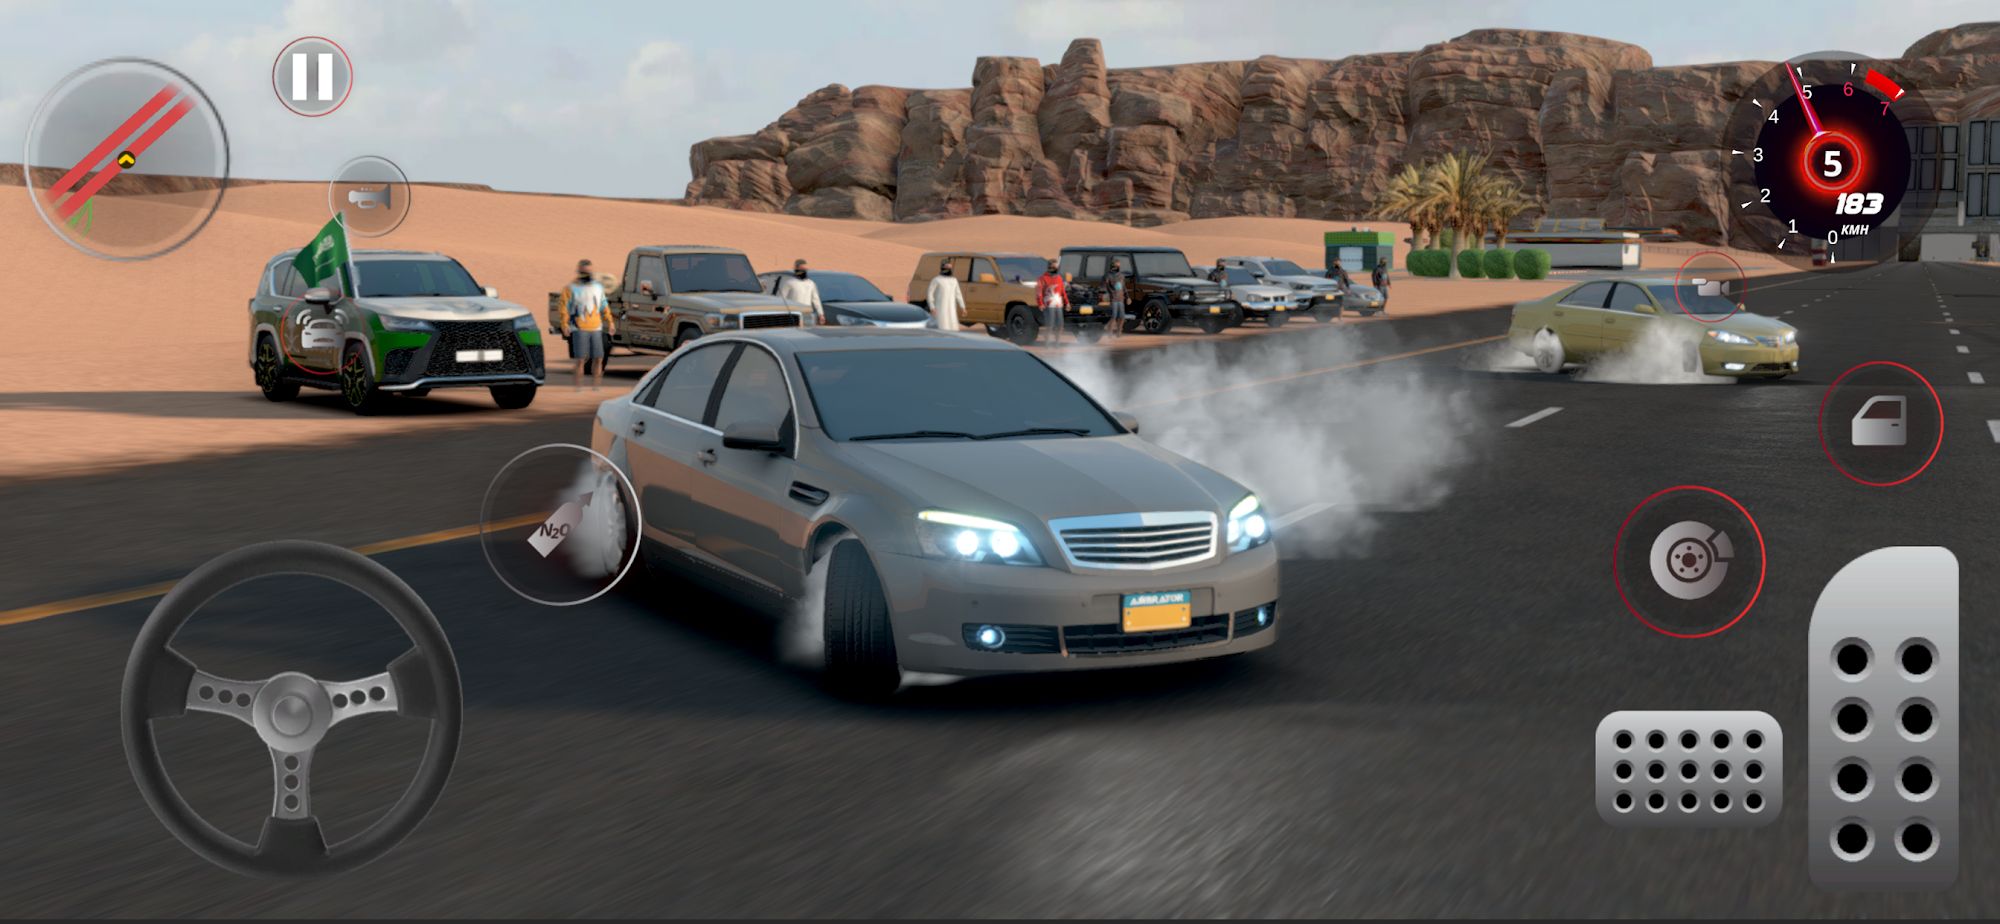 Full version of Android Cars game apk Drift for Life for tablet and phone.